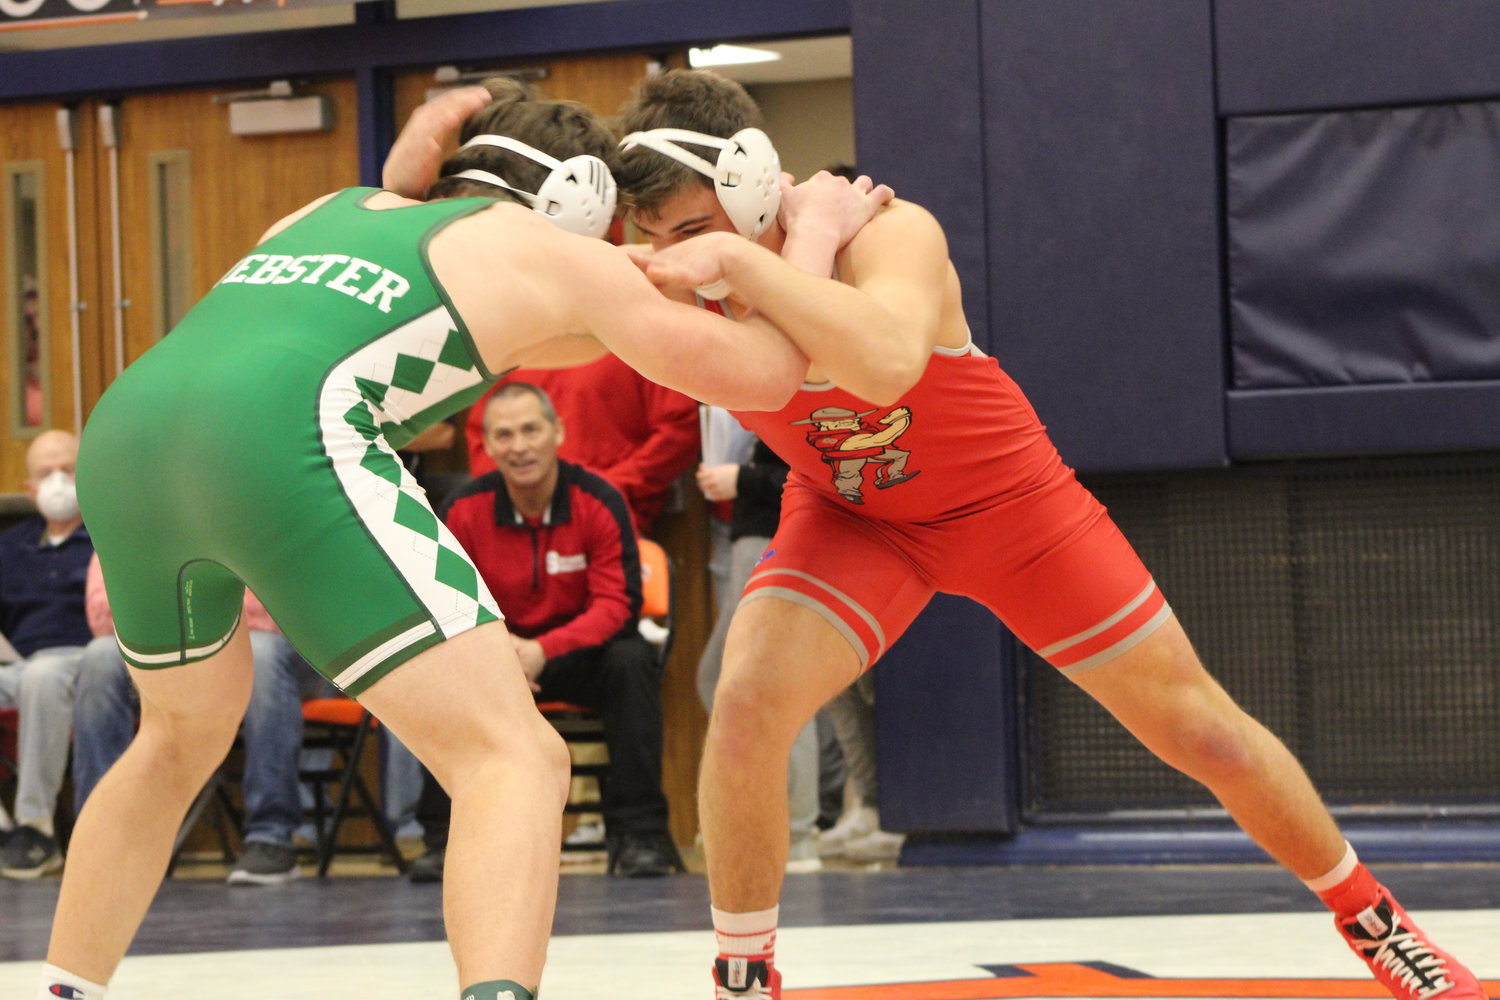 Southmont's Wyatt Woodall has the goal of wrestling at Gainbridge Fieldhouse this season as he comes in as one of the top ranked wrestlers at 195 lbs.